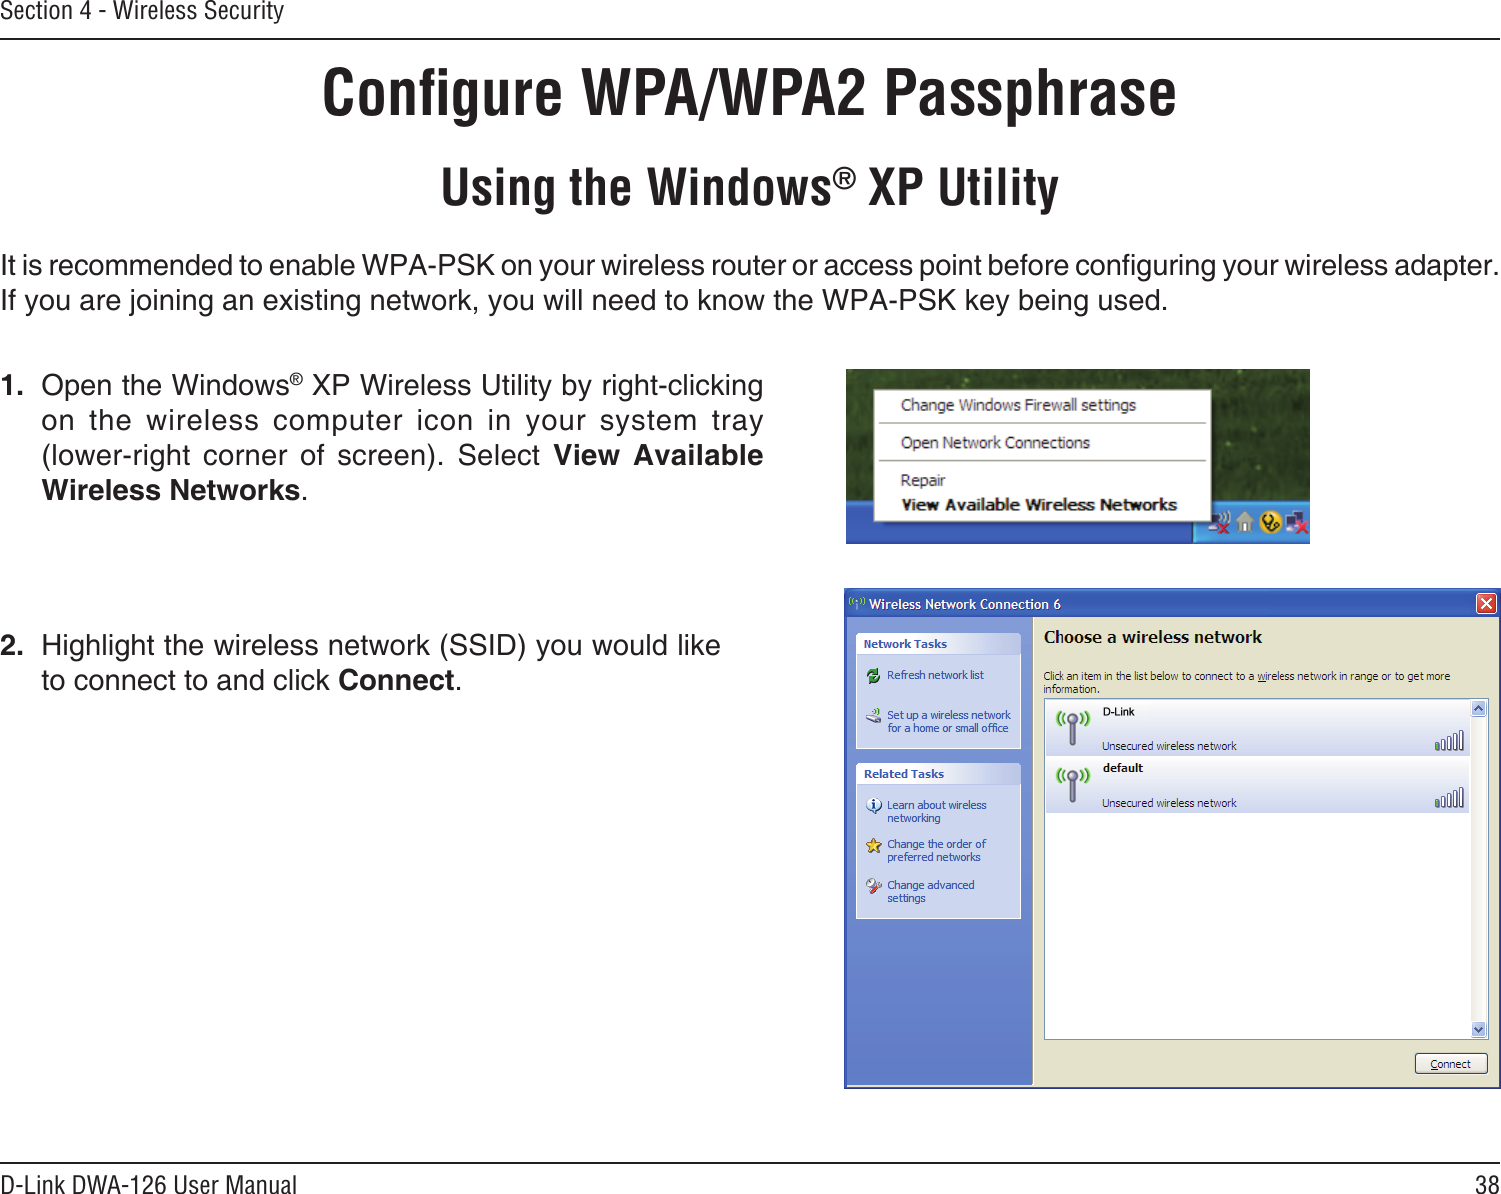 38D-Link DWA-126 User ManualSection 4 - Wireless SecurityConﬁgure WPA/WPA2 PassphraseUsing the Windows® XP UtilityIt is recommended to enable WPA-PSK on your wireless router or access point before conguring your wireless adapter. If you are joining an existing network, you will need to know the WPA-PSK key being used.2.  Highlight the wireless network (SSID) you would like to connect to and click Connect.1.  Open the Windows® XP Wireless Utility by right-clicking on  the  wireless  computer  icon  in  your  system  tray  (lower-right  corner  of  screen).  Select  View  Available Wireless Networks. 